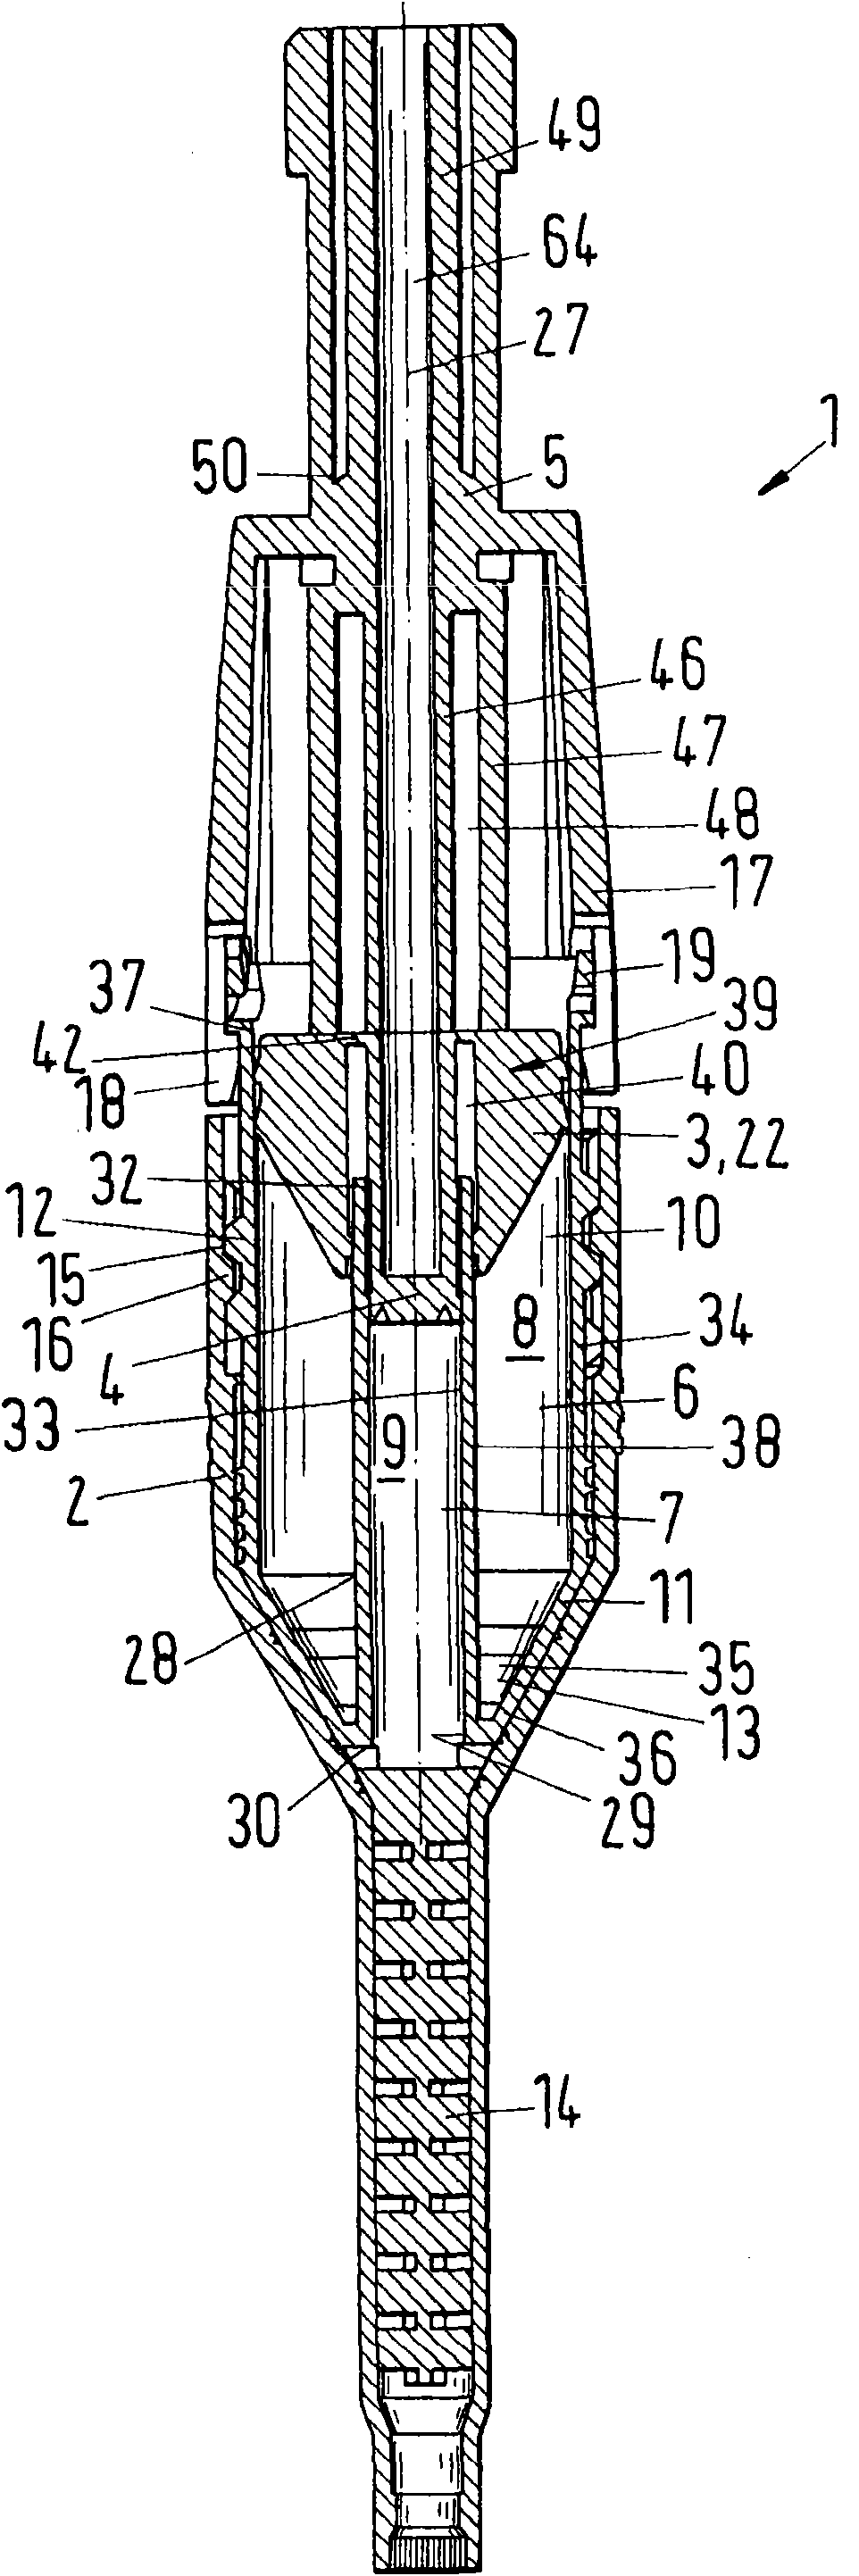 Multicomponent cartridge for one-time use